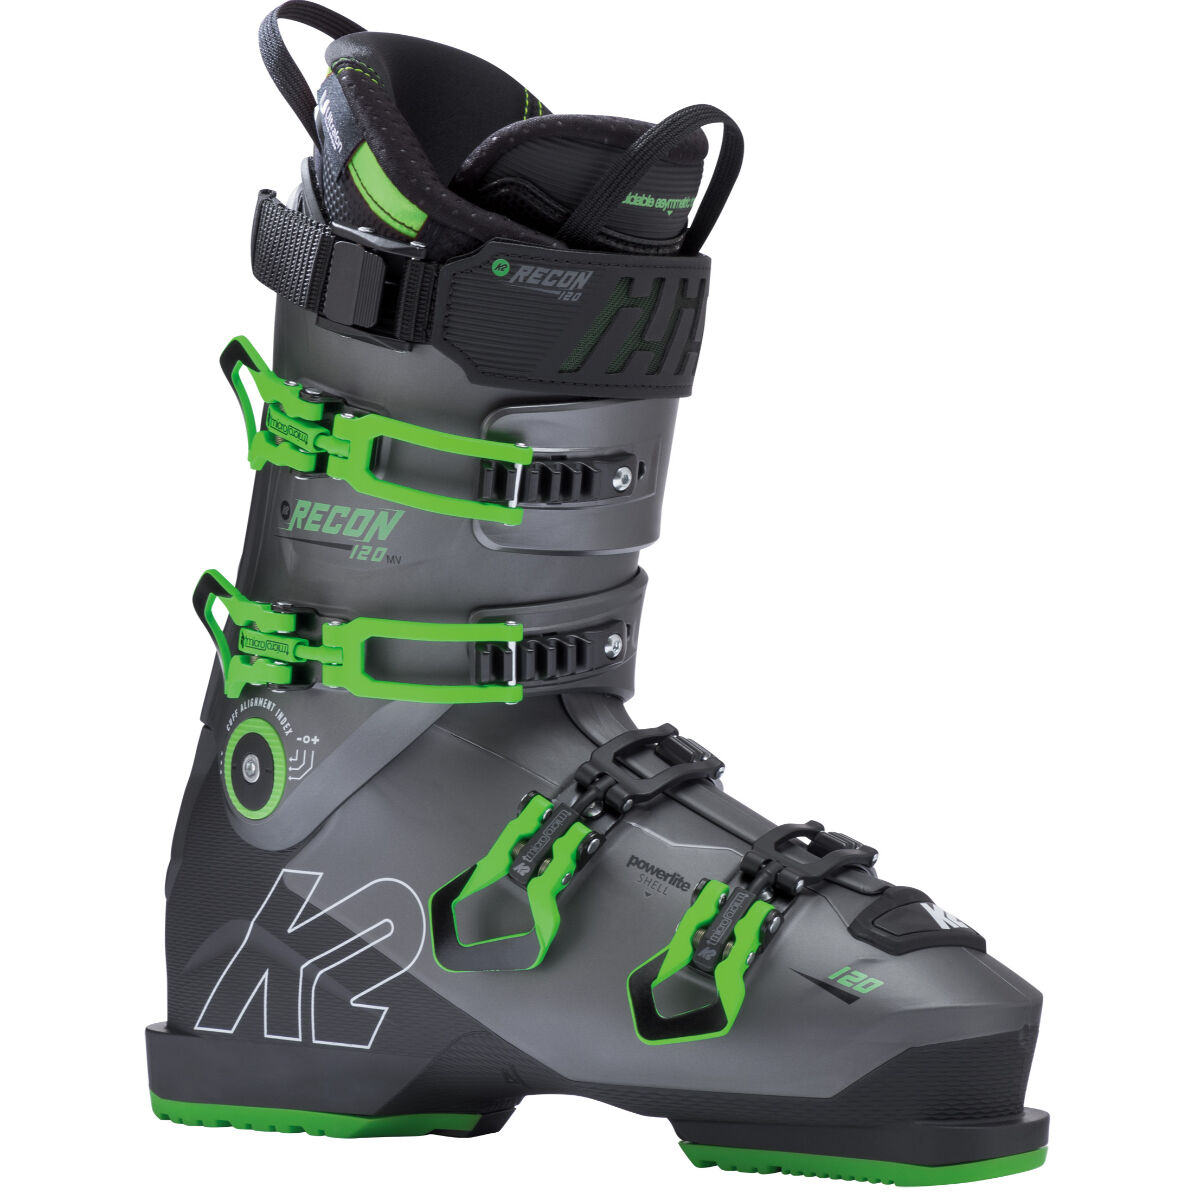 ski boots and skis for sale